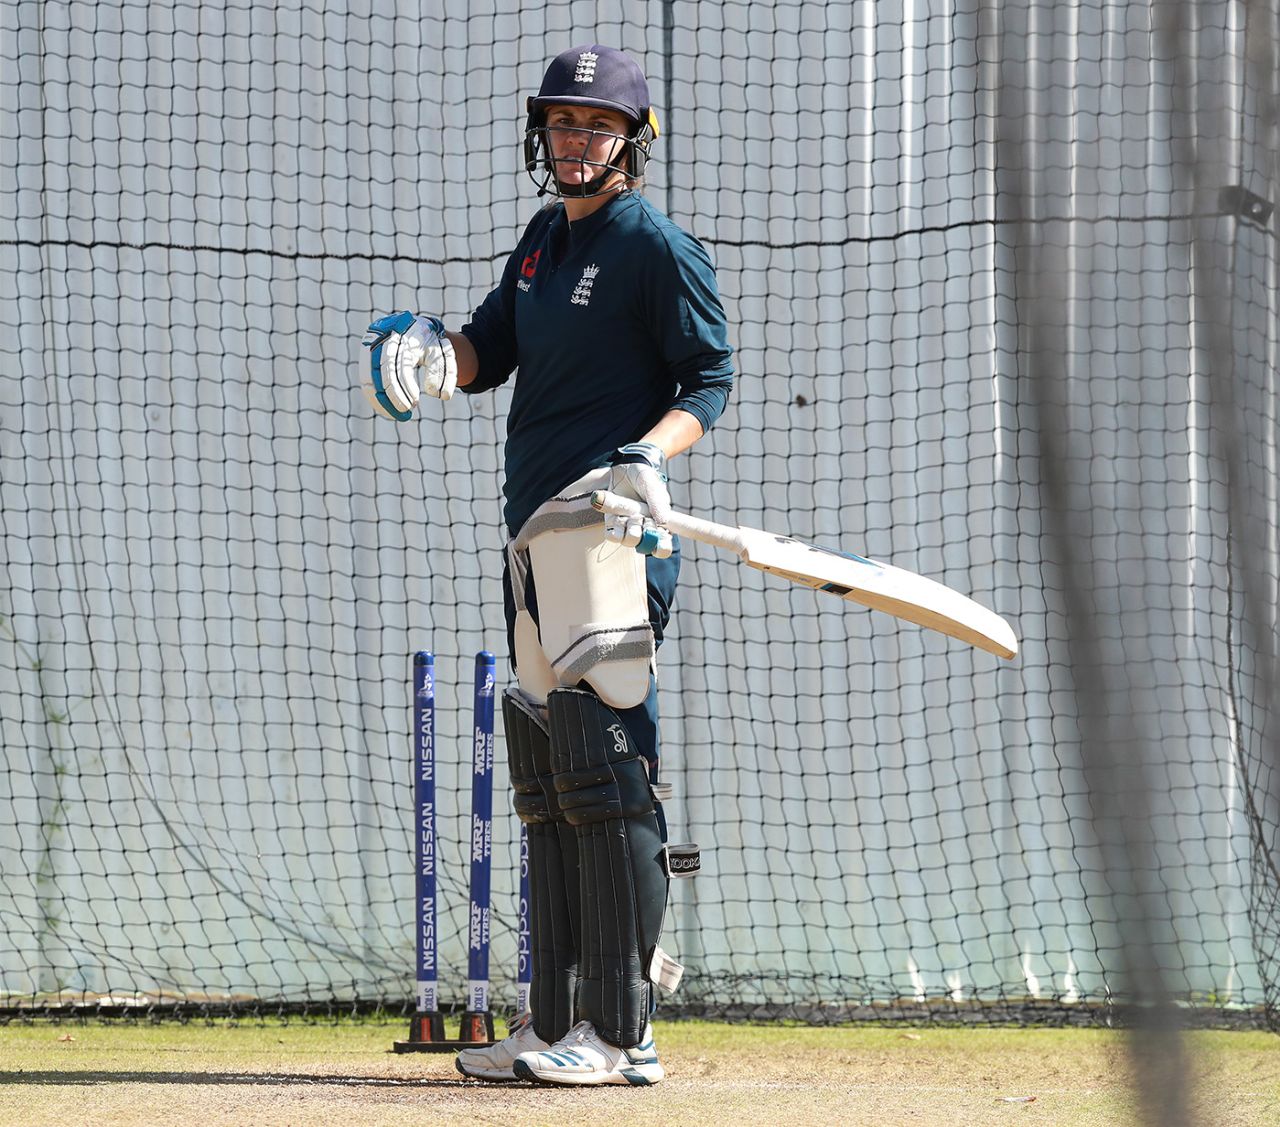 Nat Sciver bats in the nets, Grace Road, July 1, 2019